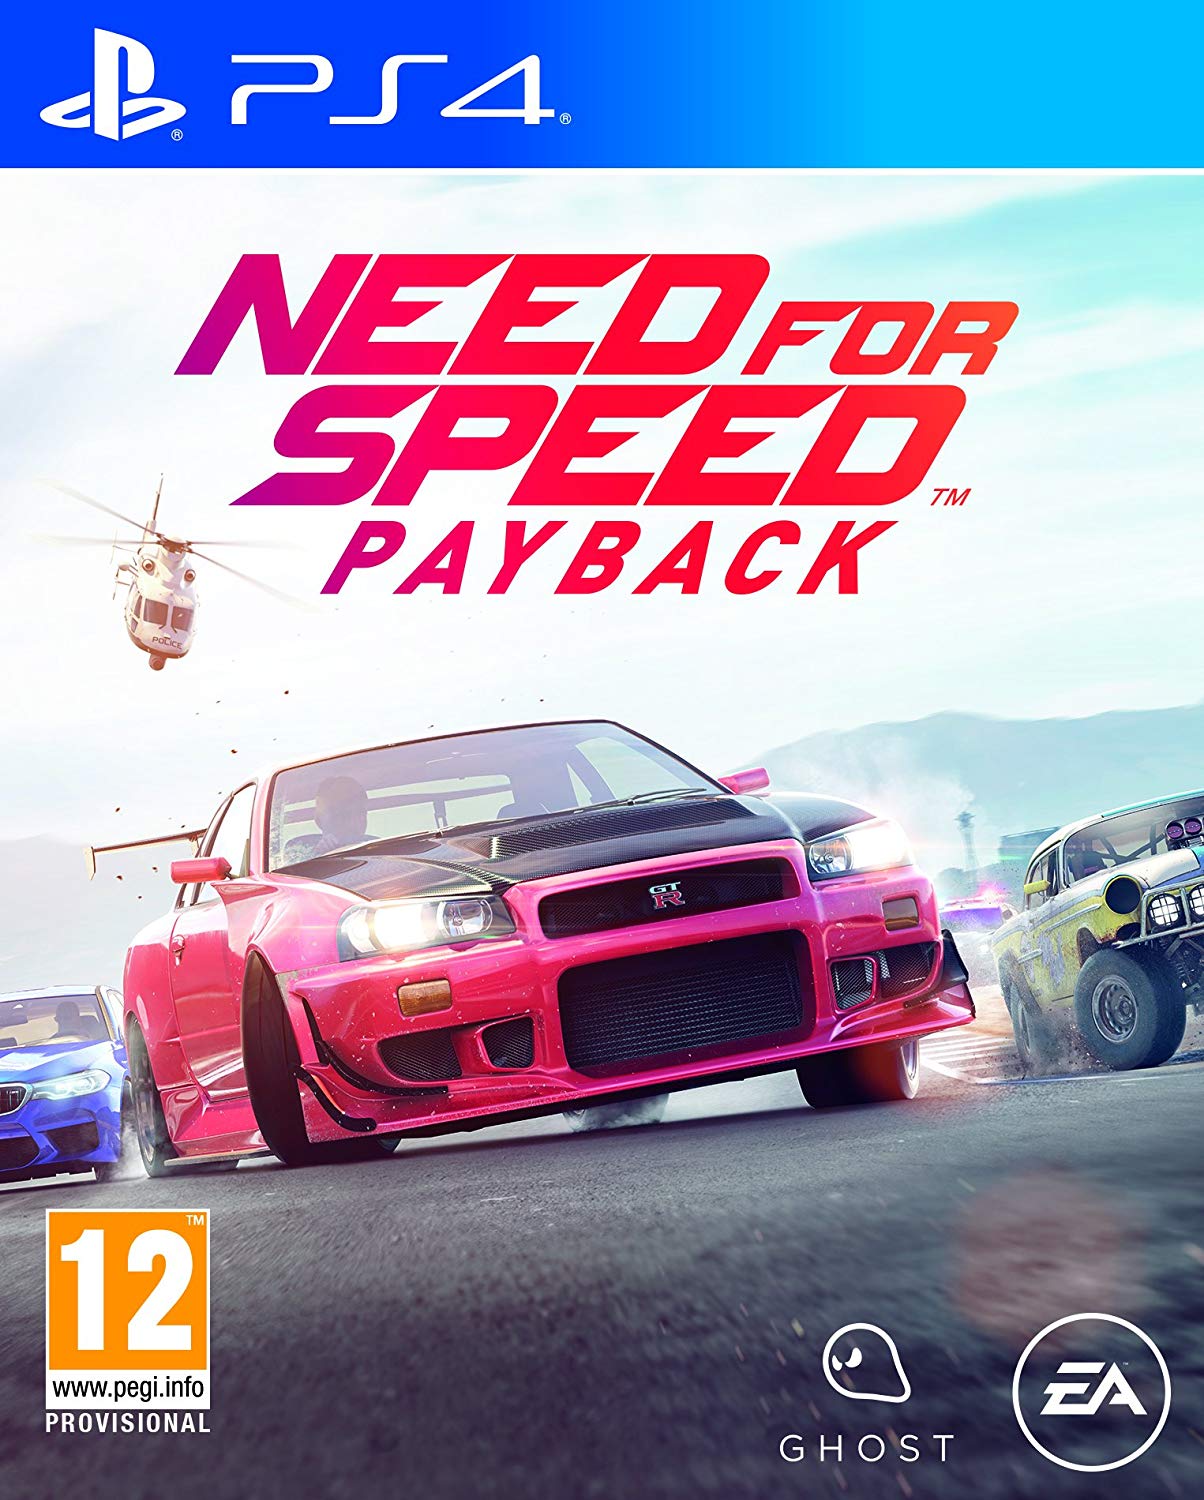 Juego PS4 Need For Speed Payback